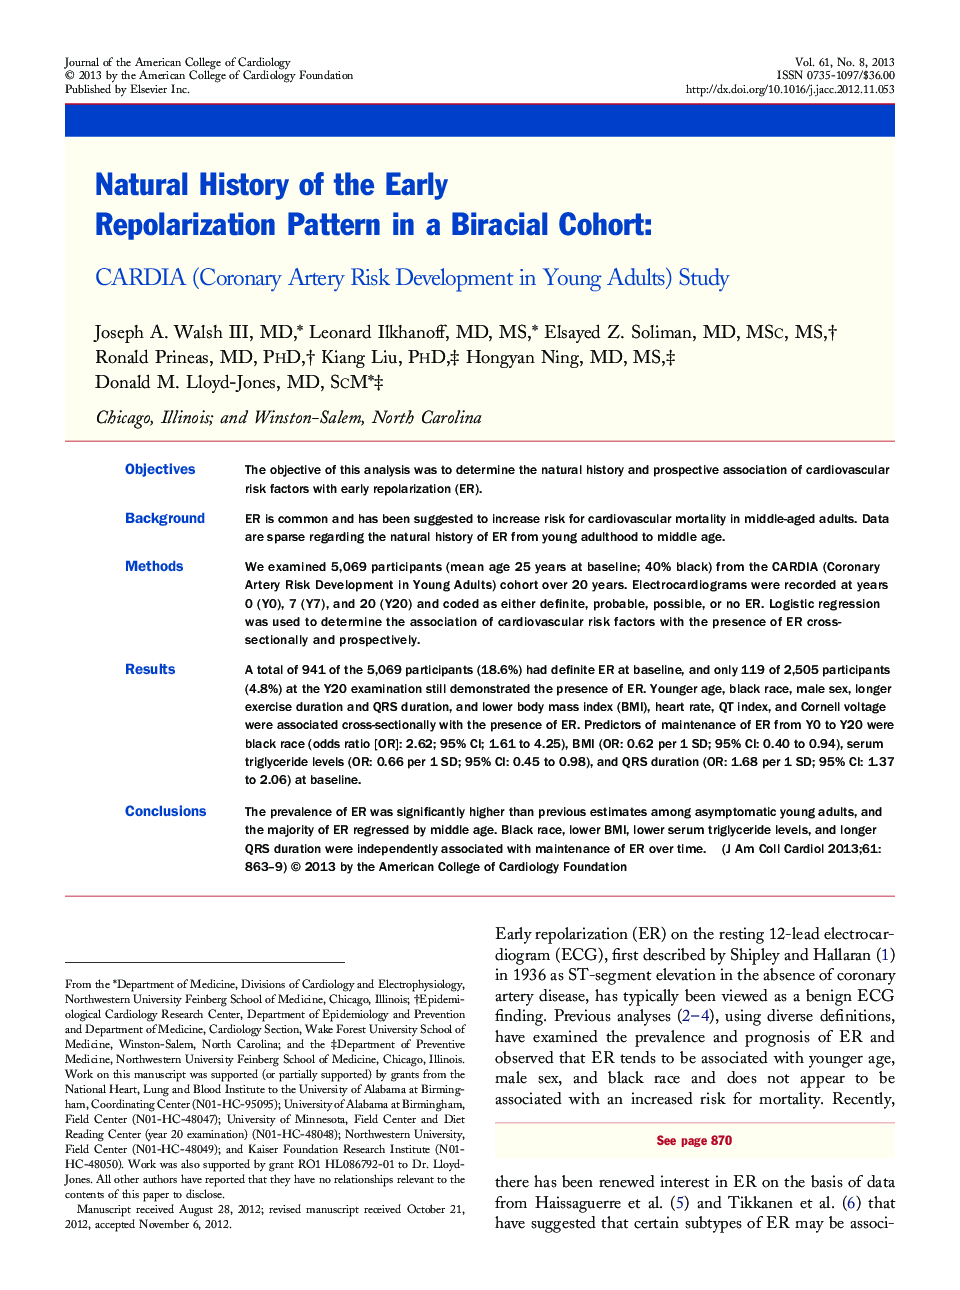 Natural History of the Early Repolarization Pattern in a Biracial Cohort : CARDIA (Coronary Artery Risk Development in Young Adults) Study